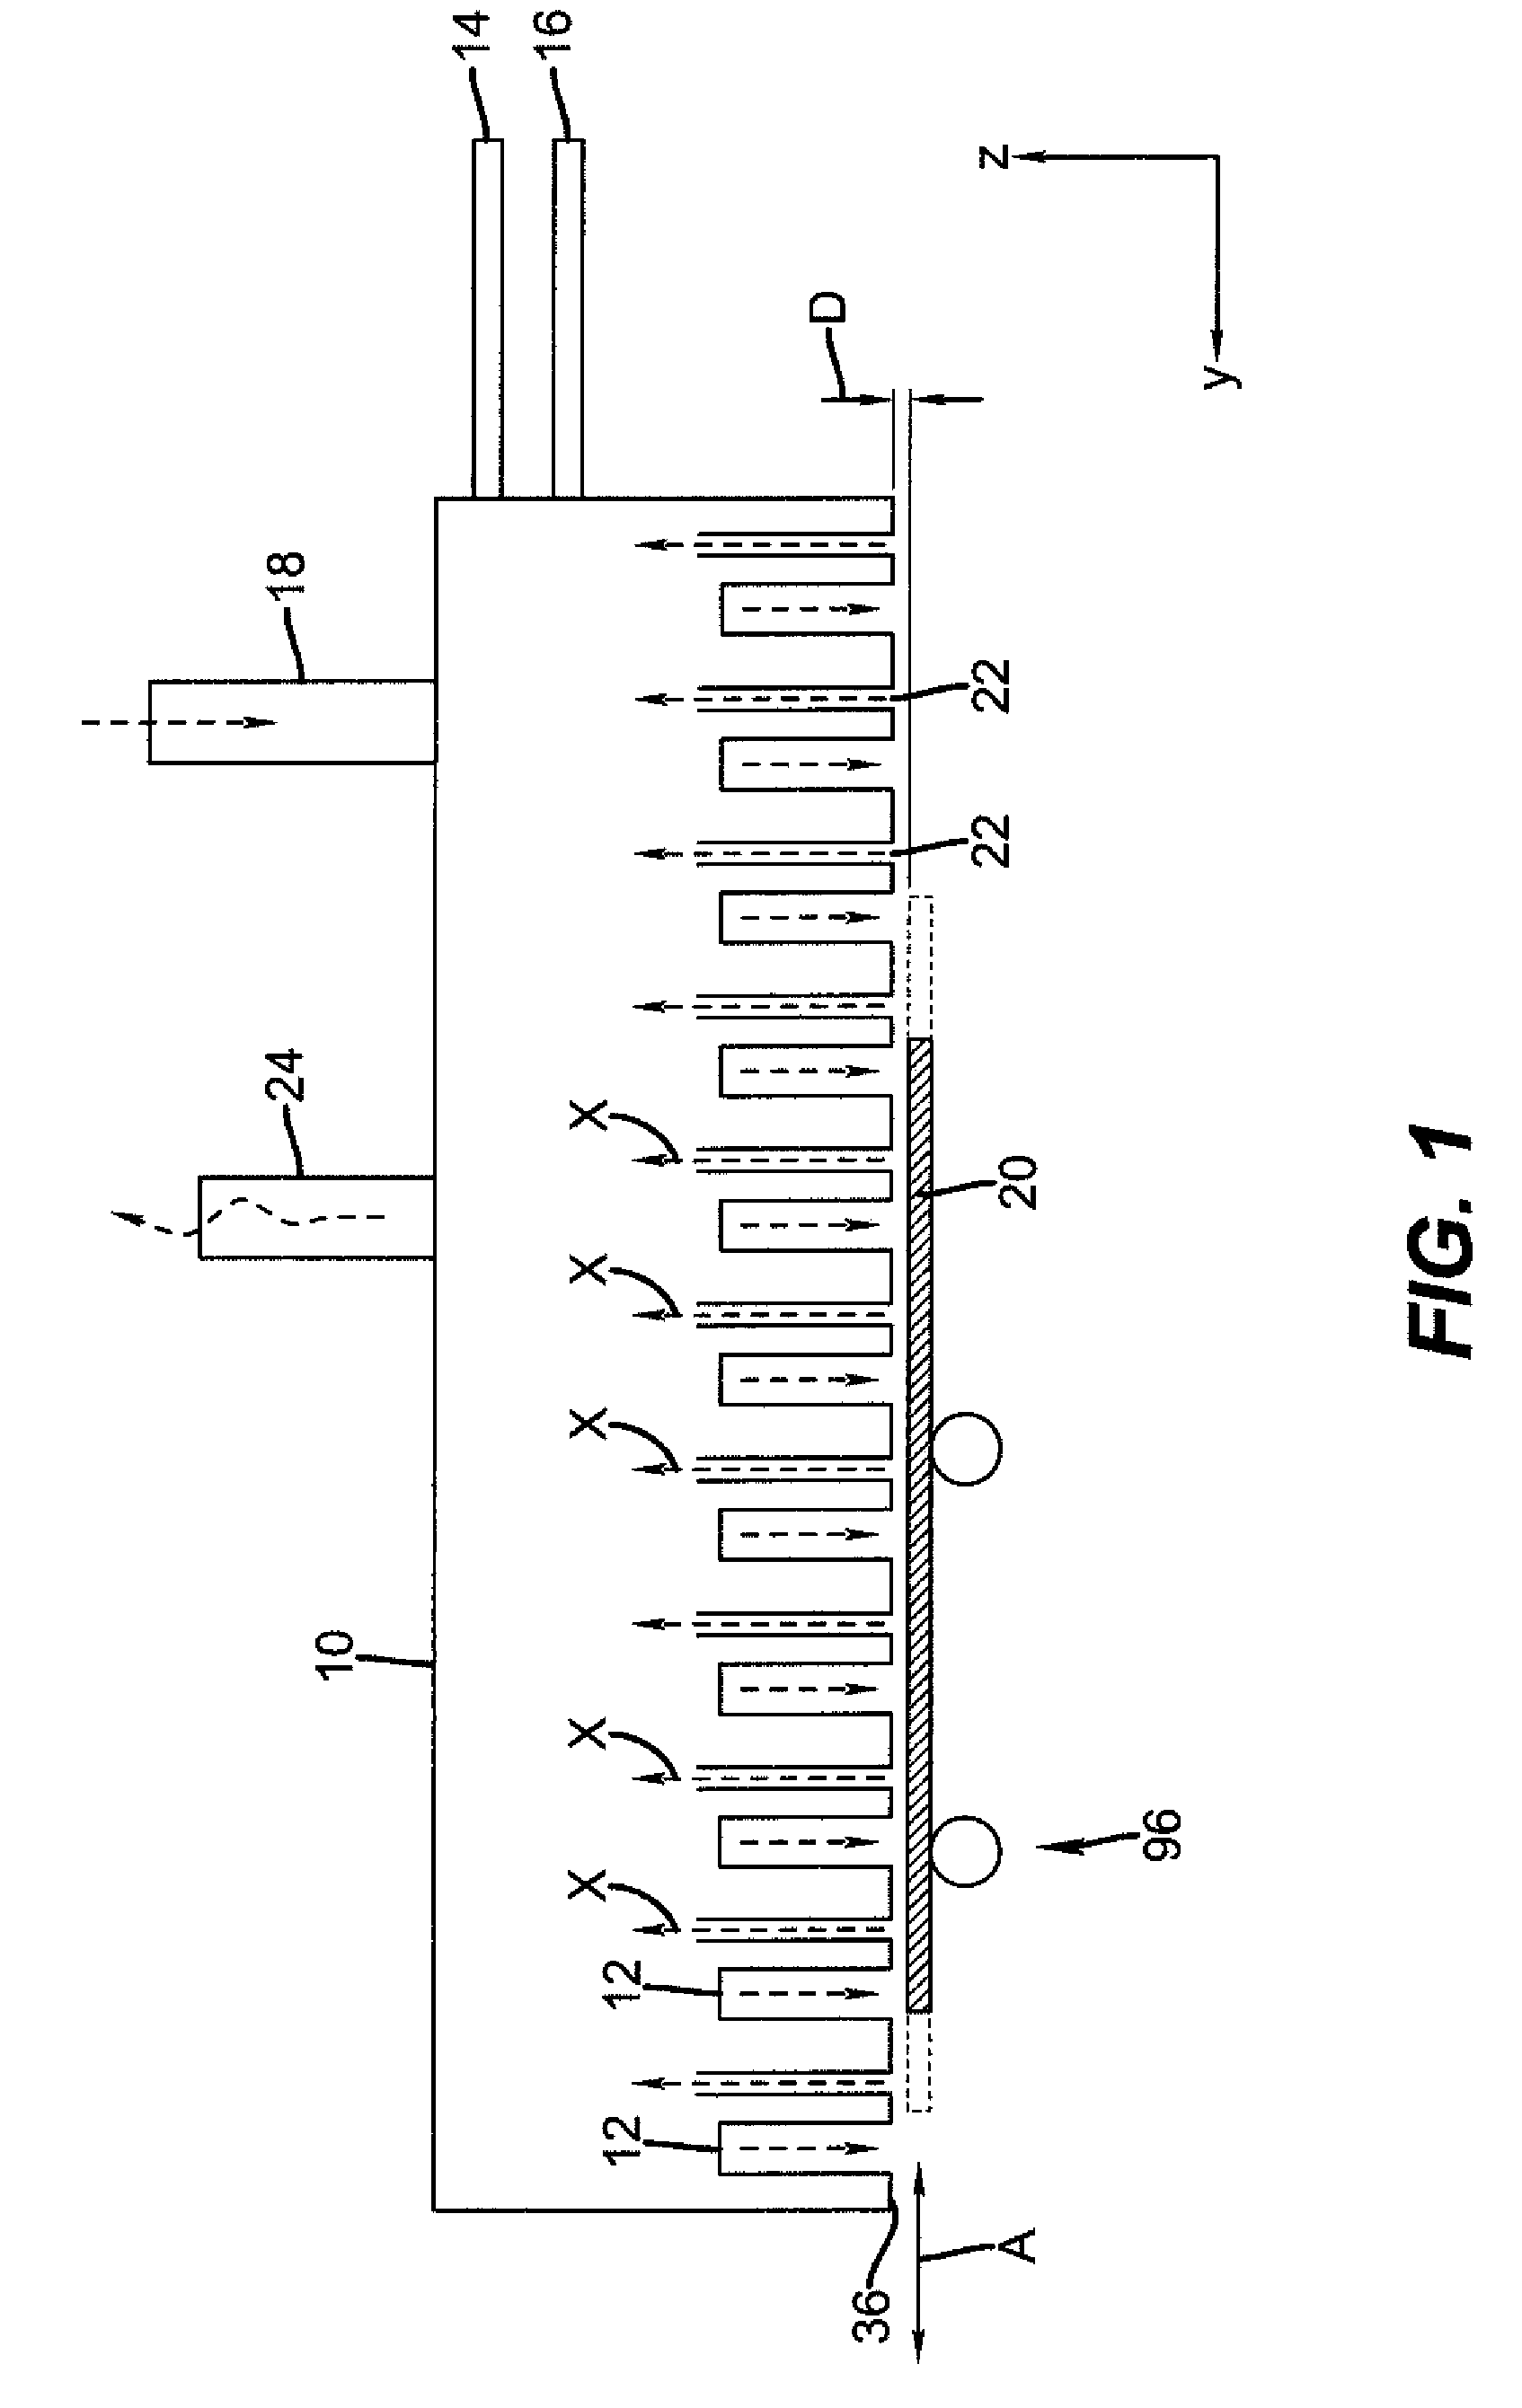 Process for selective area deposition of inorganic materials